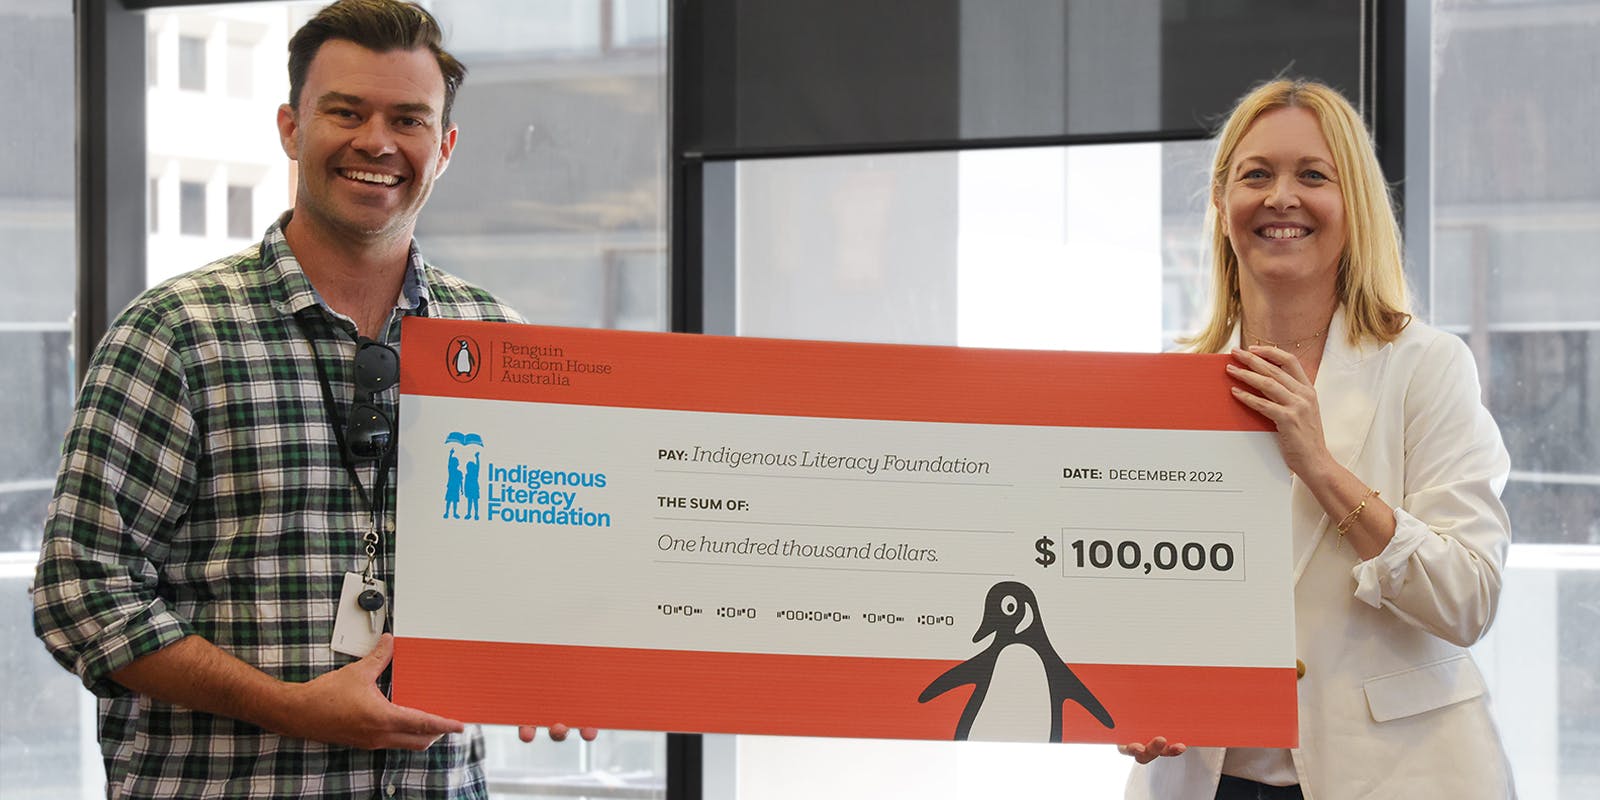 Penguin Random House ANZ donated $100,000 to Indigenous Literacy Foundation in 2022